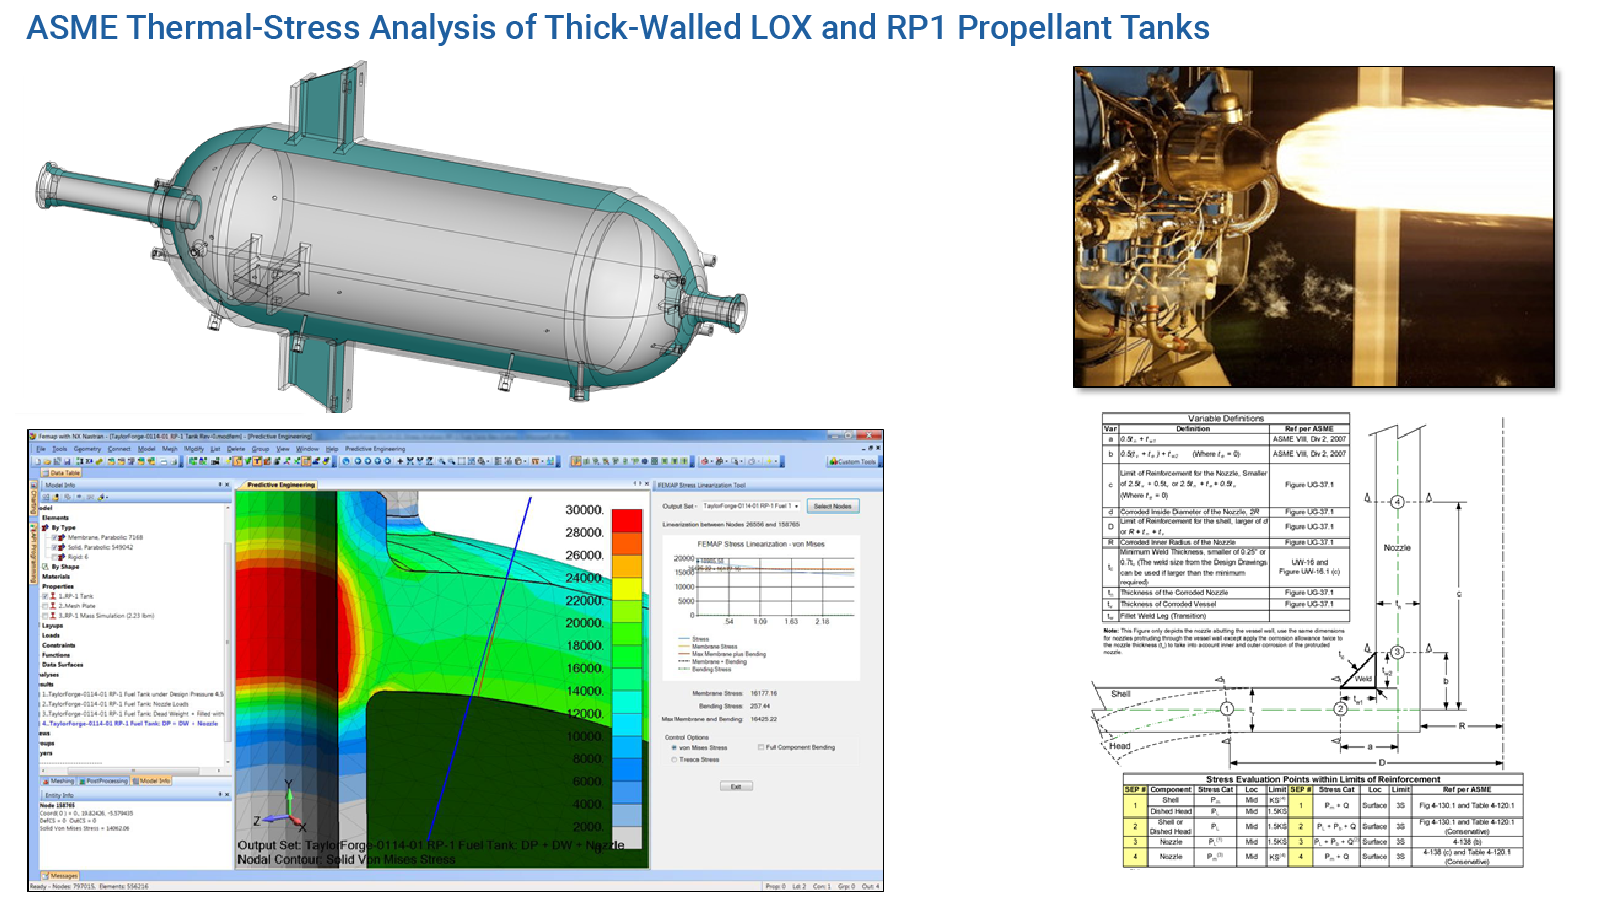 ASME Thermal-Stress Analysis of Thick-Walled LOX and RP1 Propellant Tanks - ASME Section VIII, Division 2 Part 5 - FEA Engineering Services